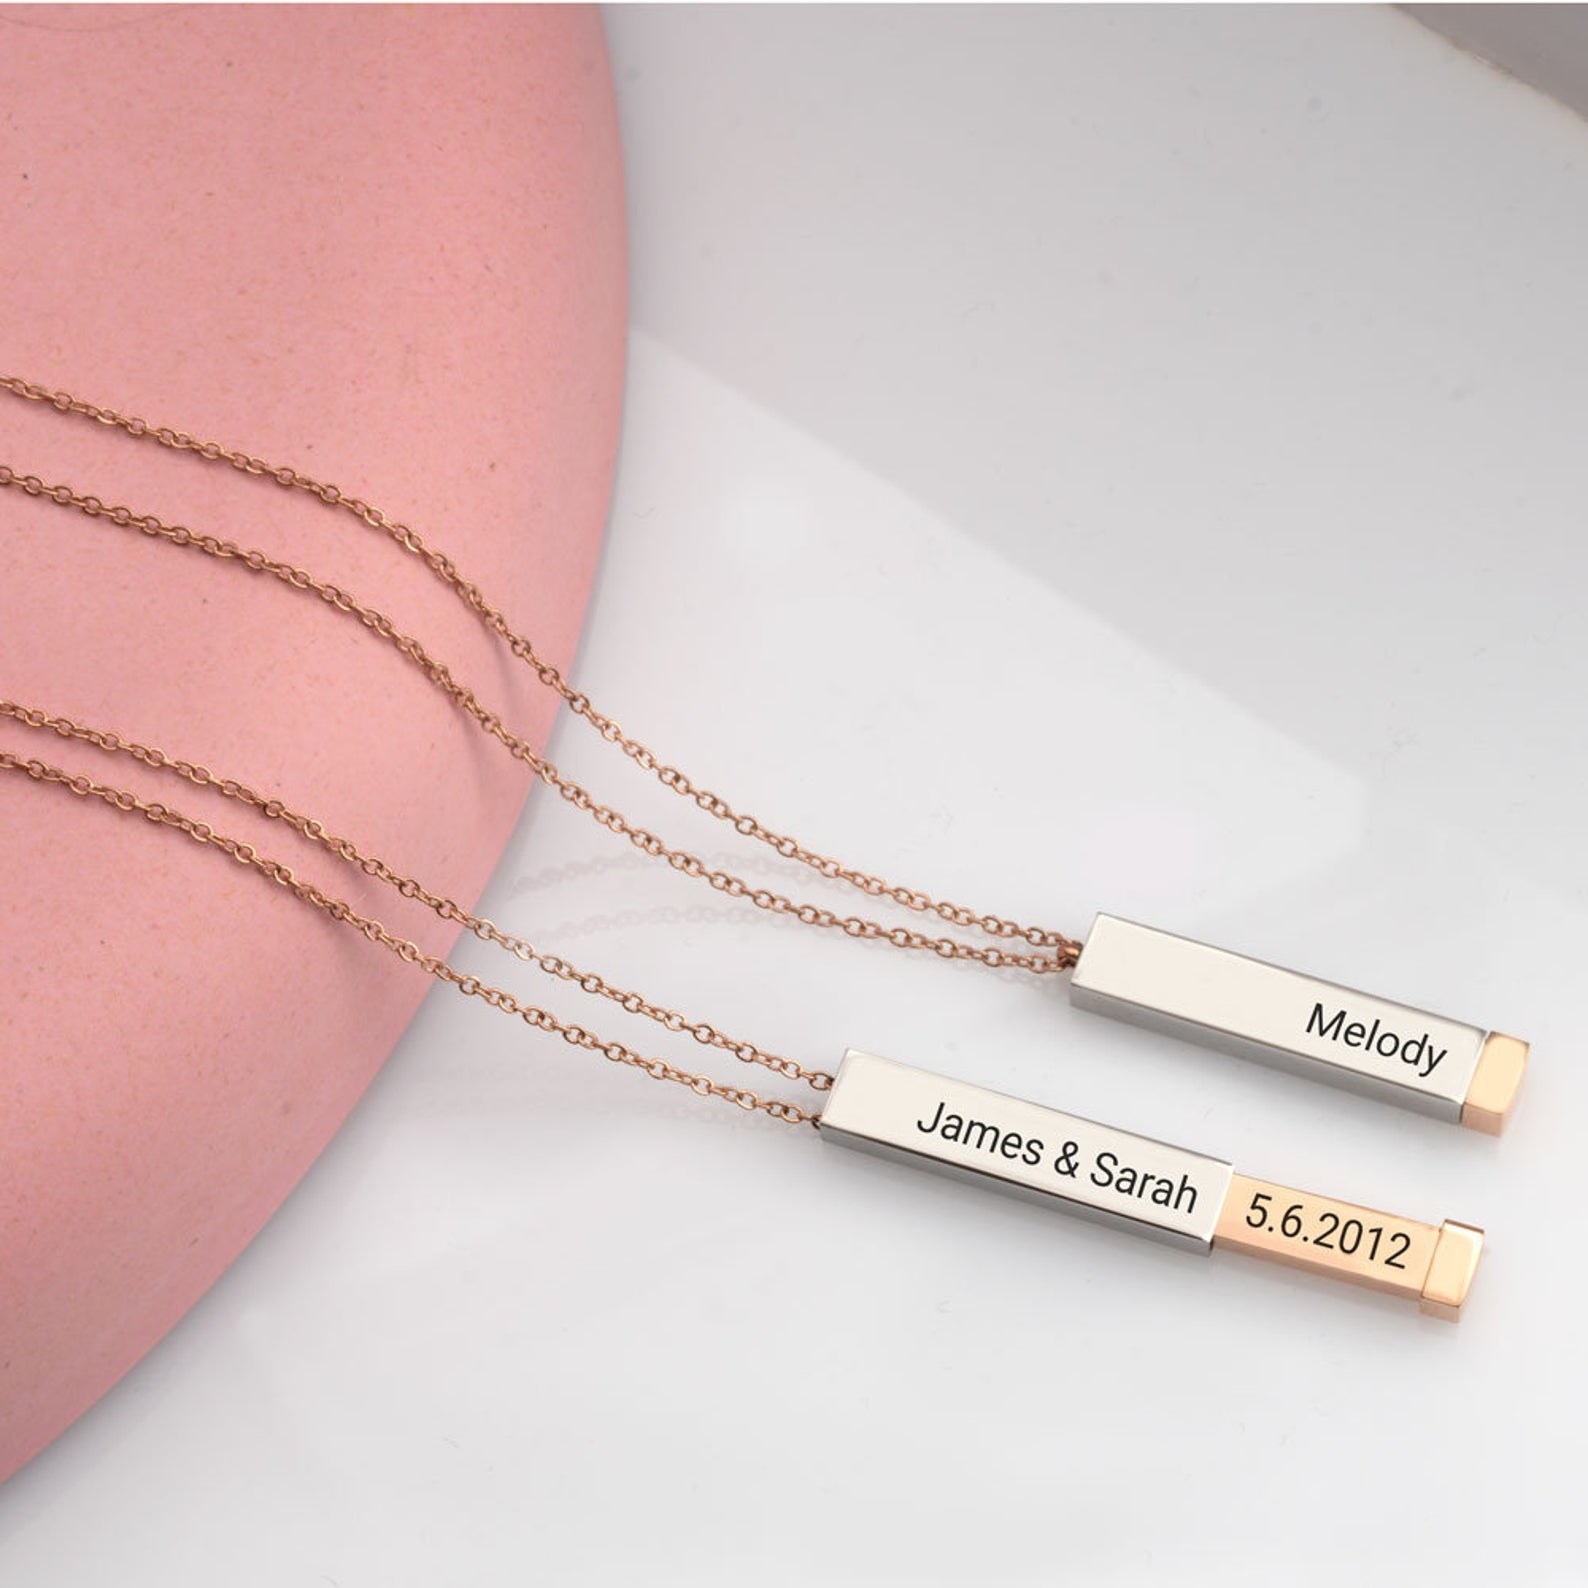 The hidden message chain necklace